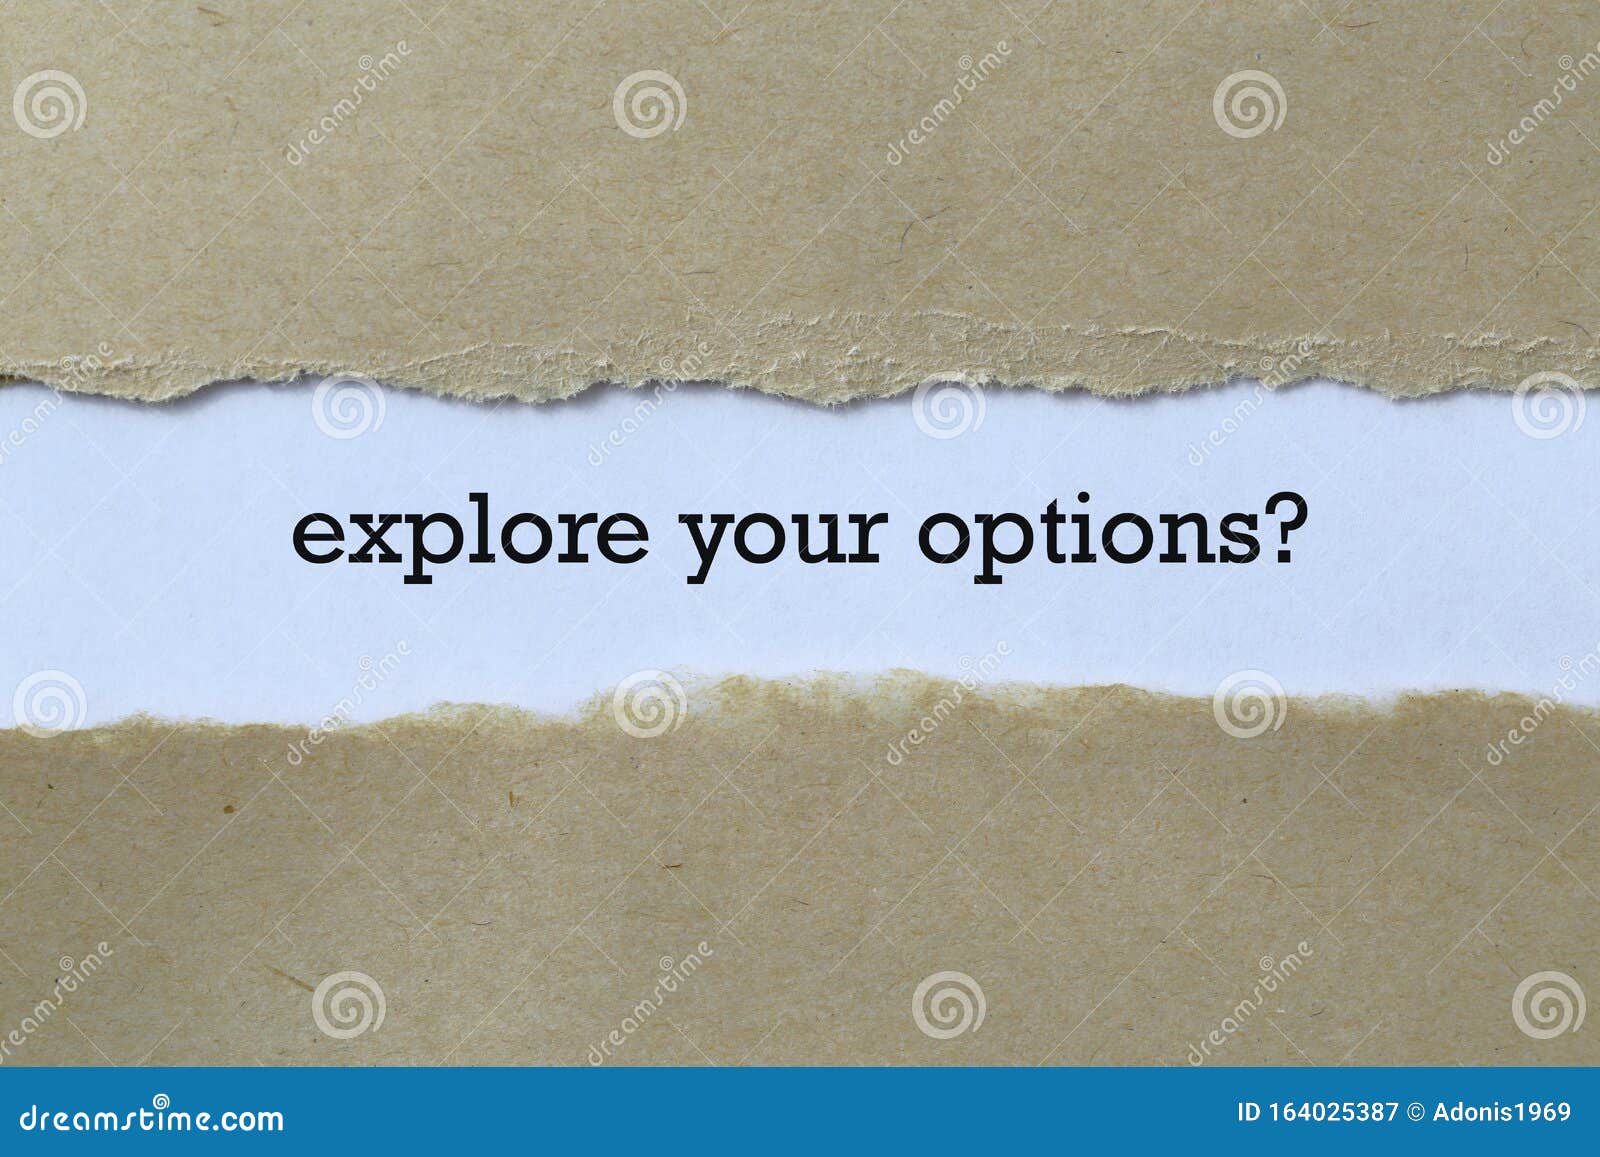 explore your options